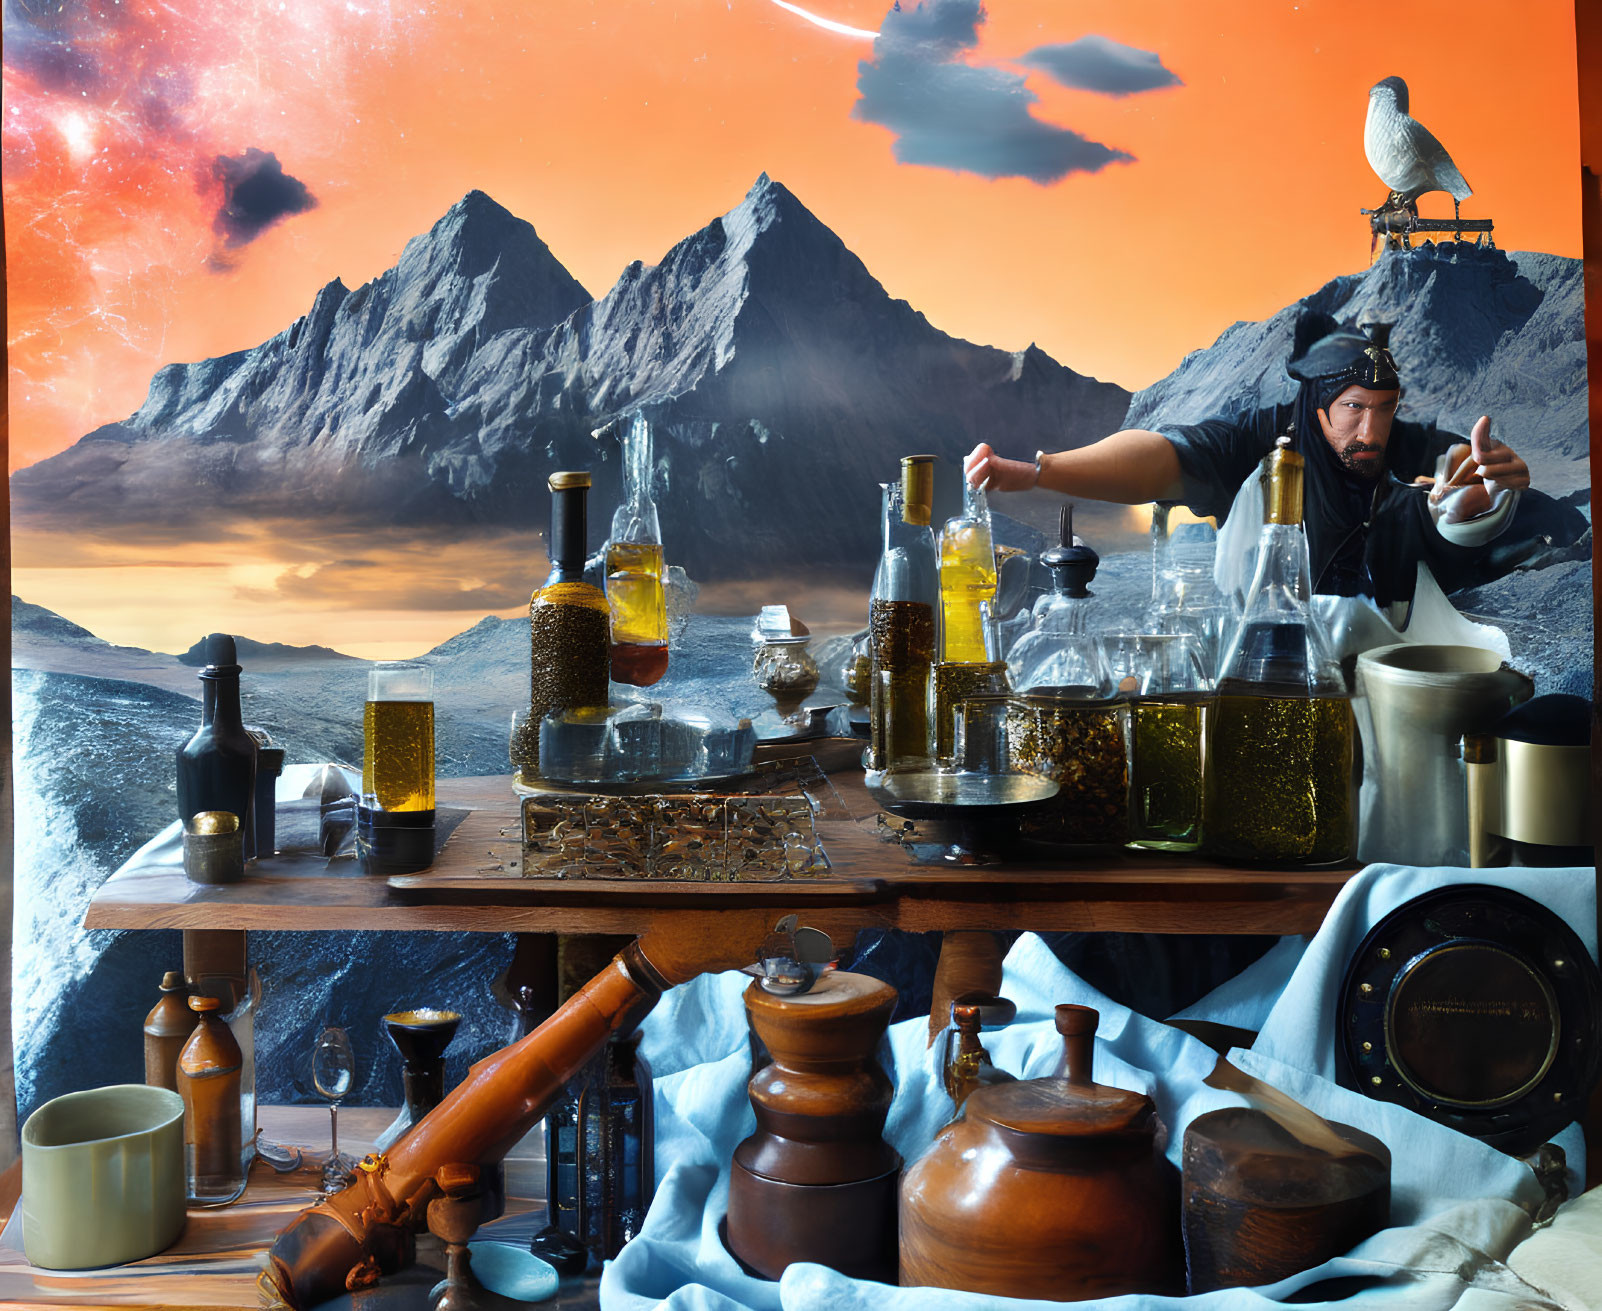 Person mixing chemicals in alchemist's laboratory with mountainous backdrop and surreal orange sky